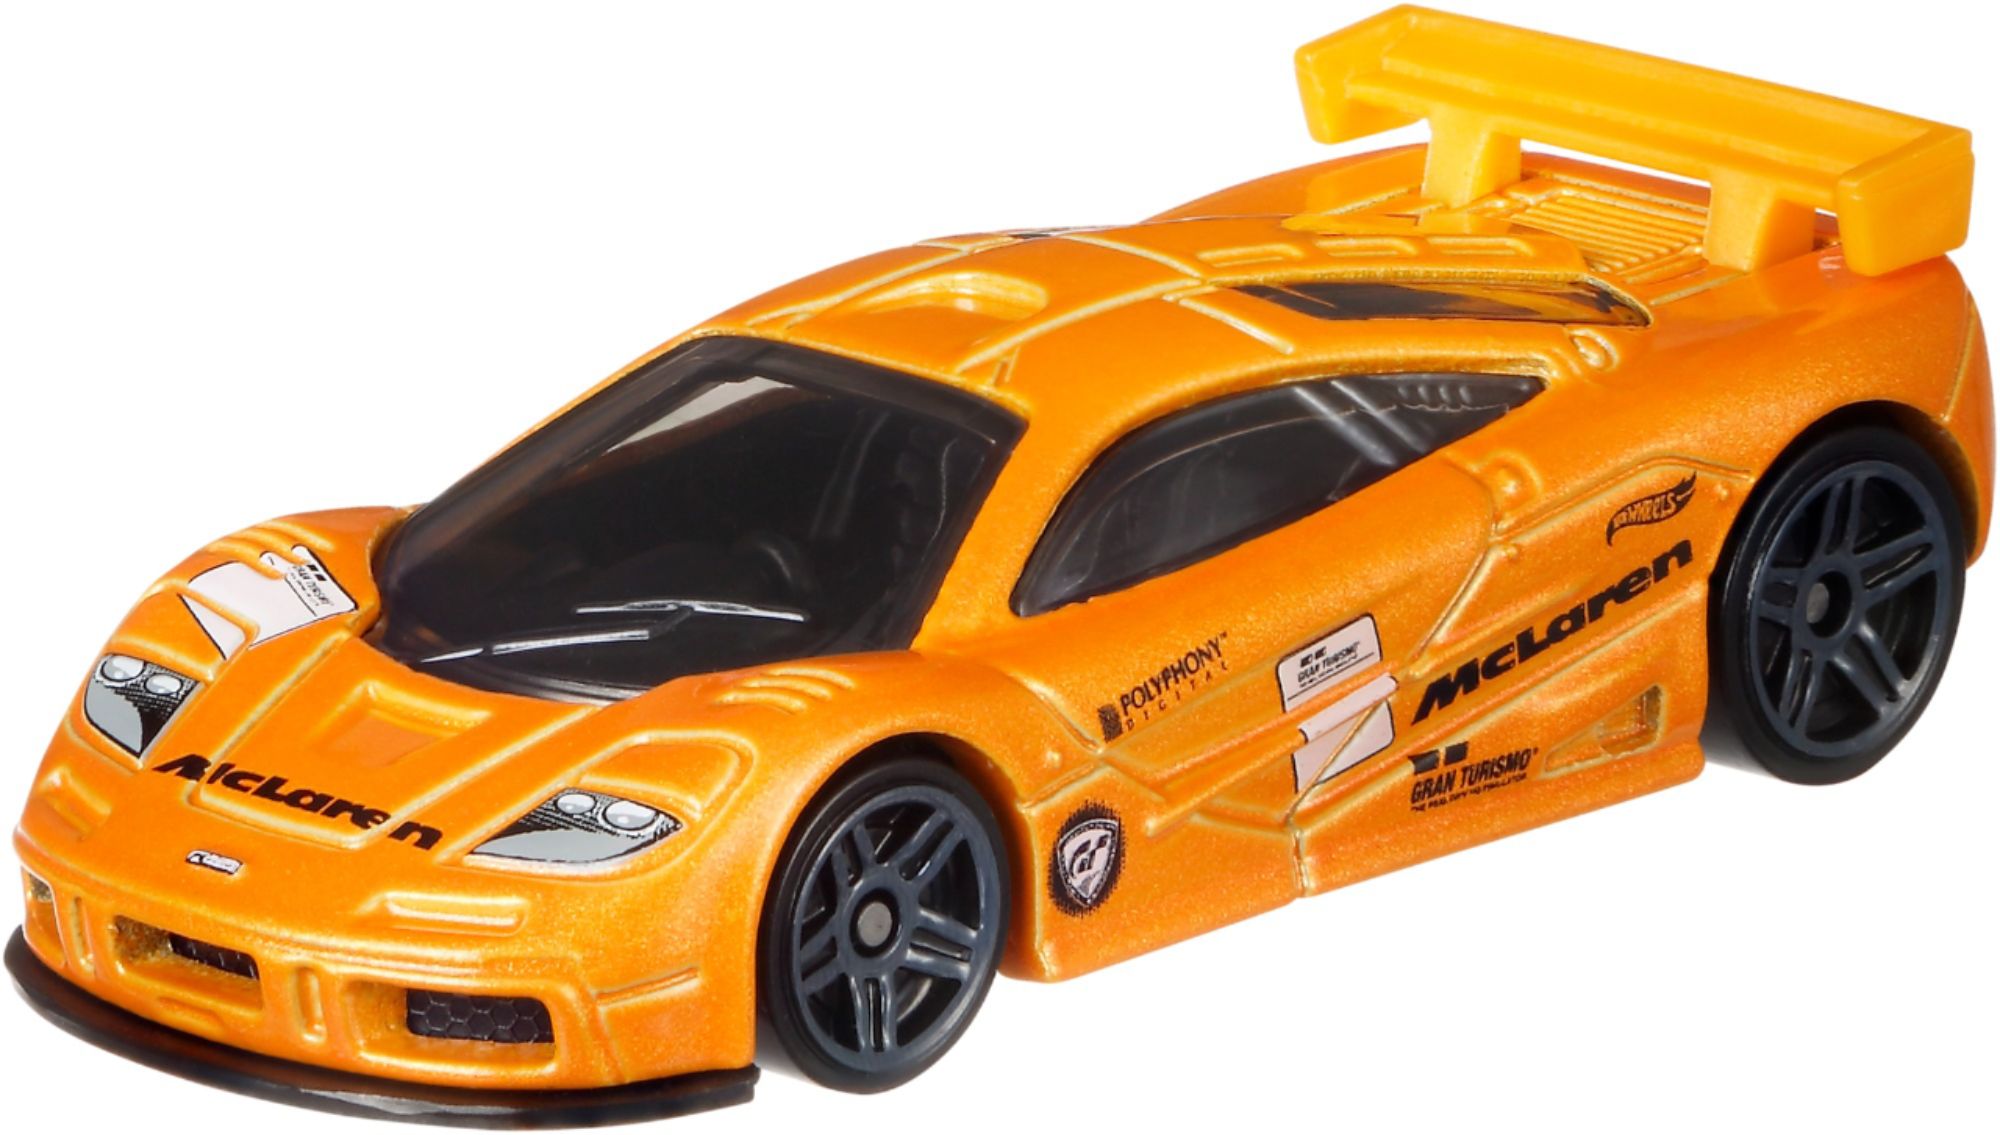 Gran Turismo for Your Pocket: More Hot Wheels Collaboration Leaks – GTPlanet